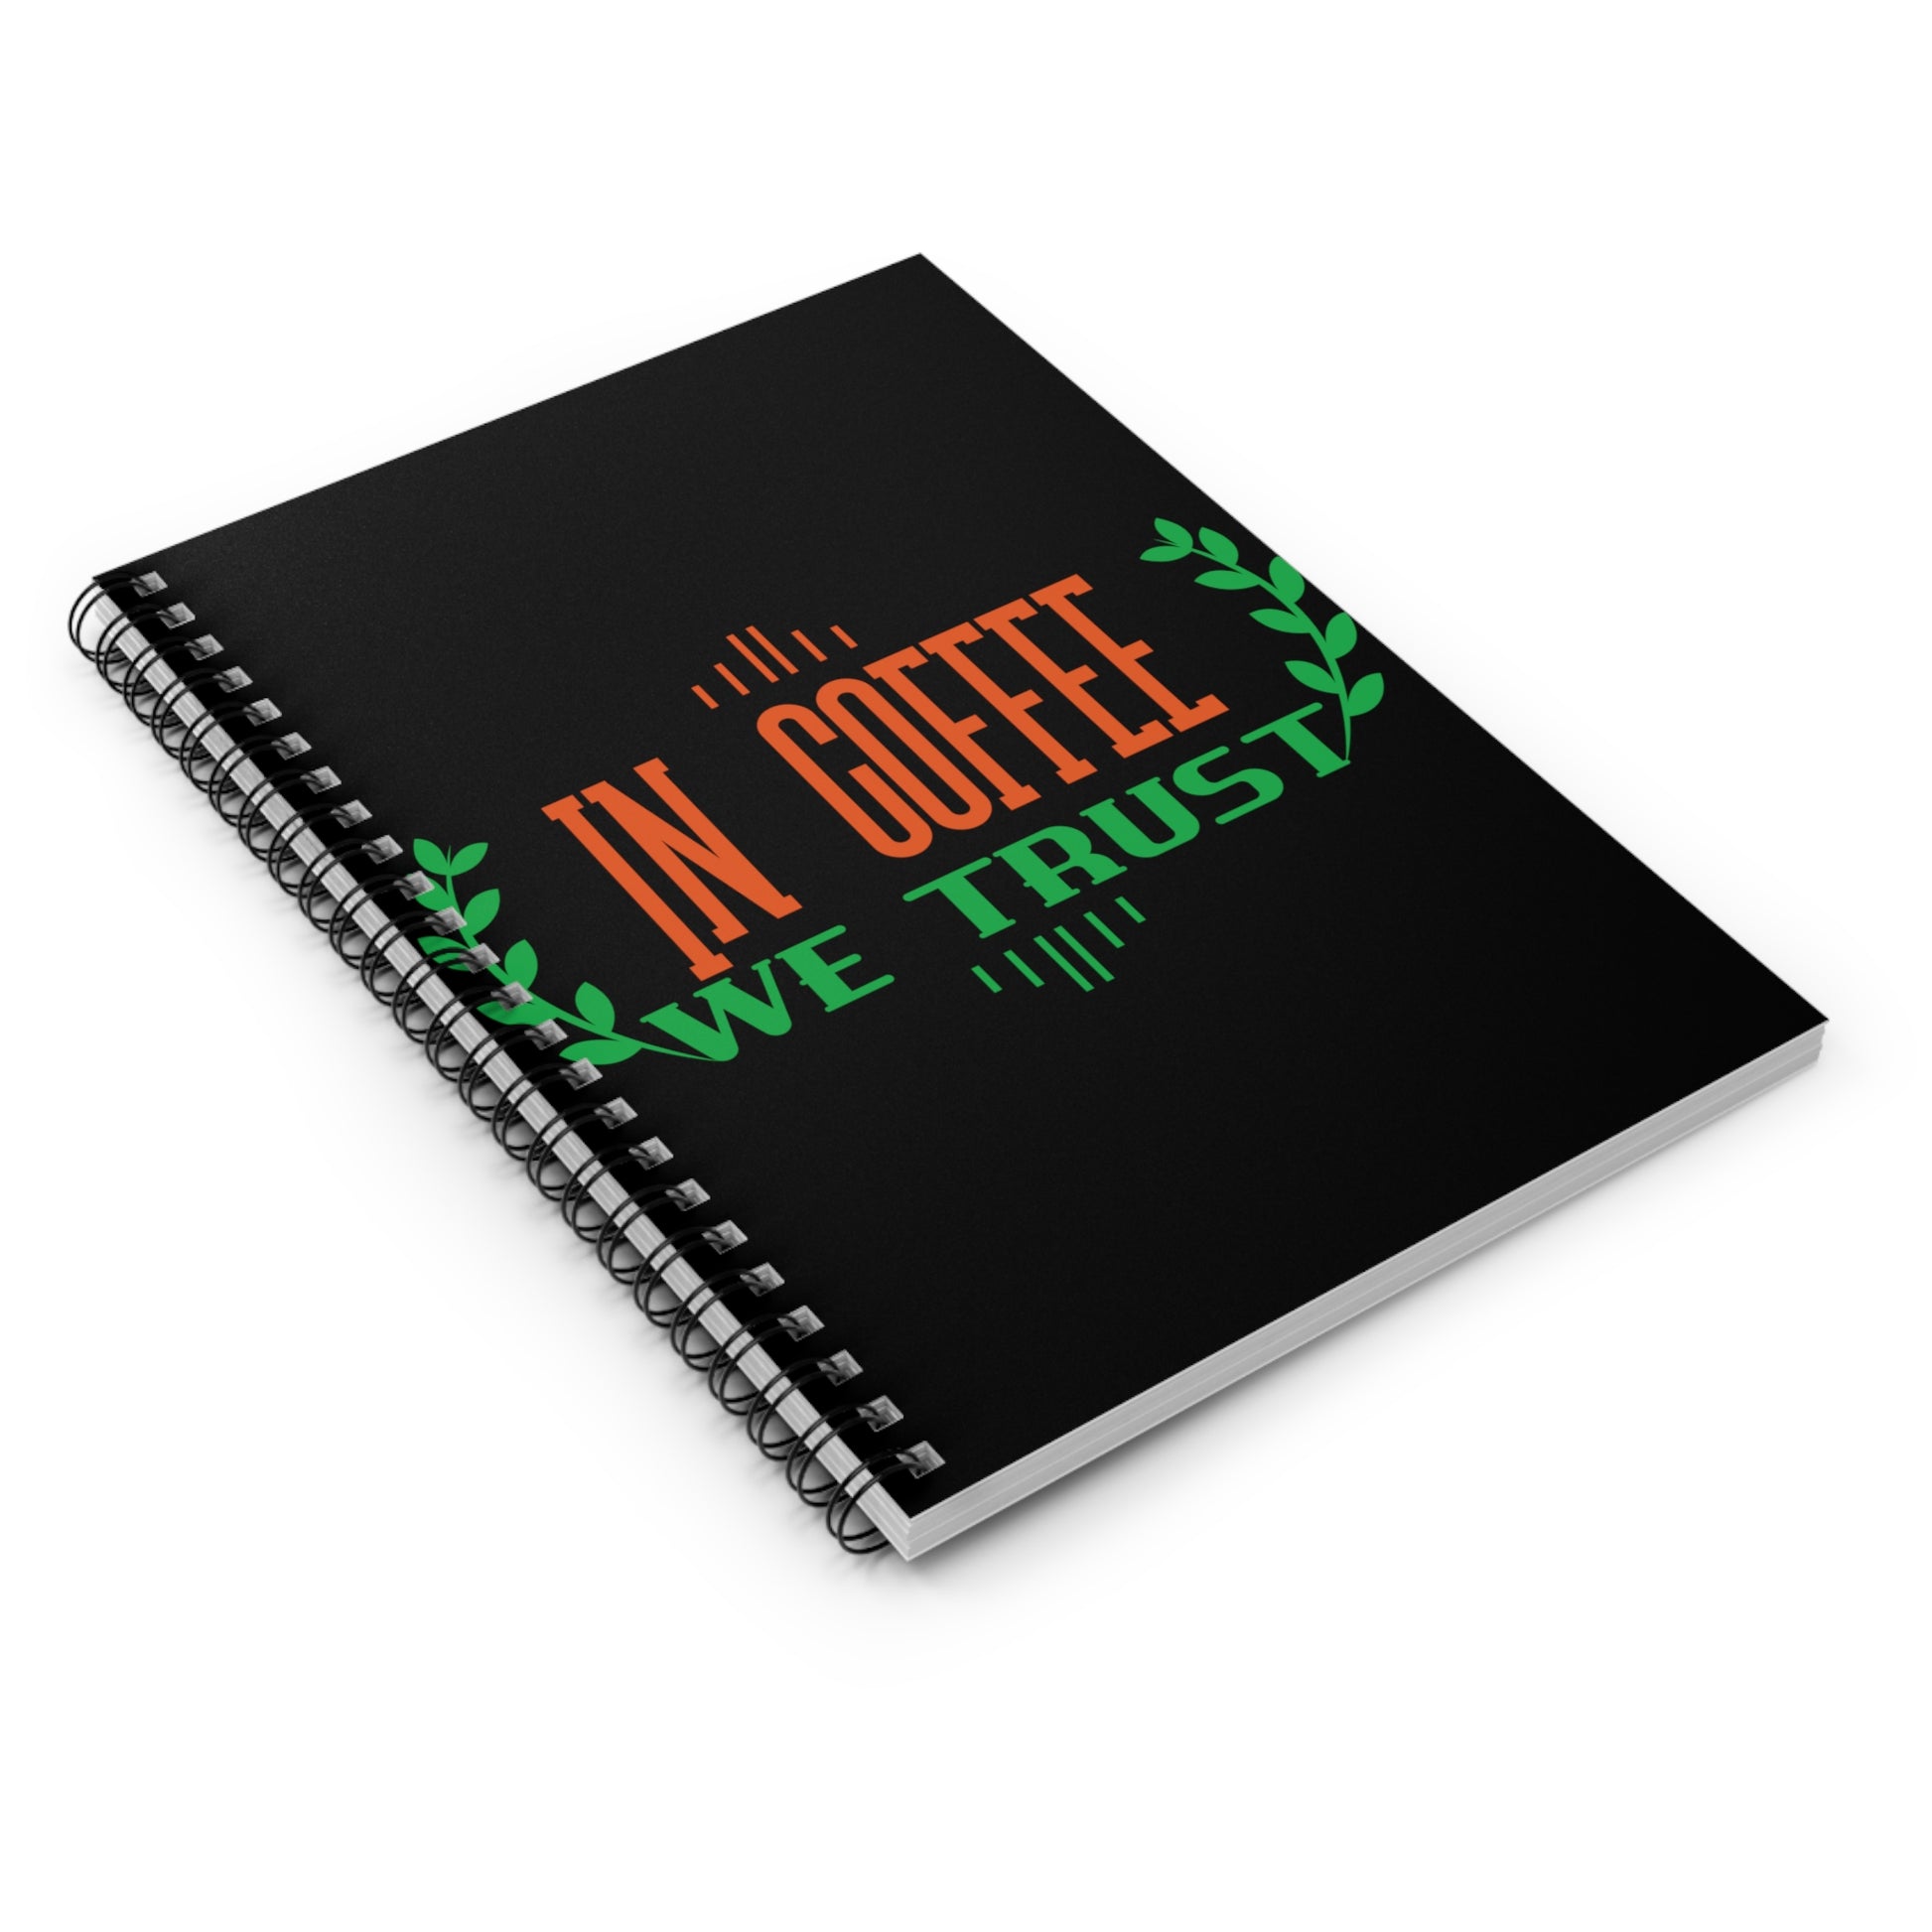 In Coffee We Trust: Spiral Notebook - Log Books - Journals - Diaries - and More Custom Printed by TheGlassyLass